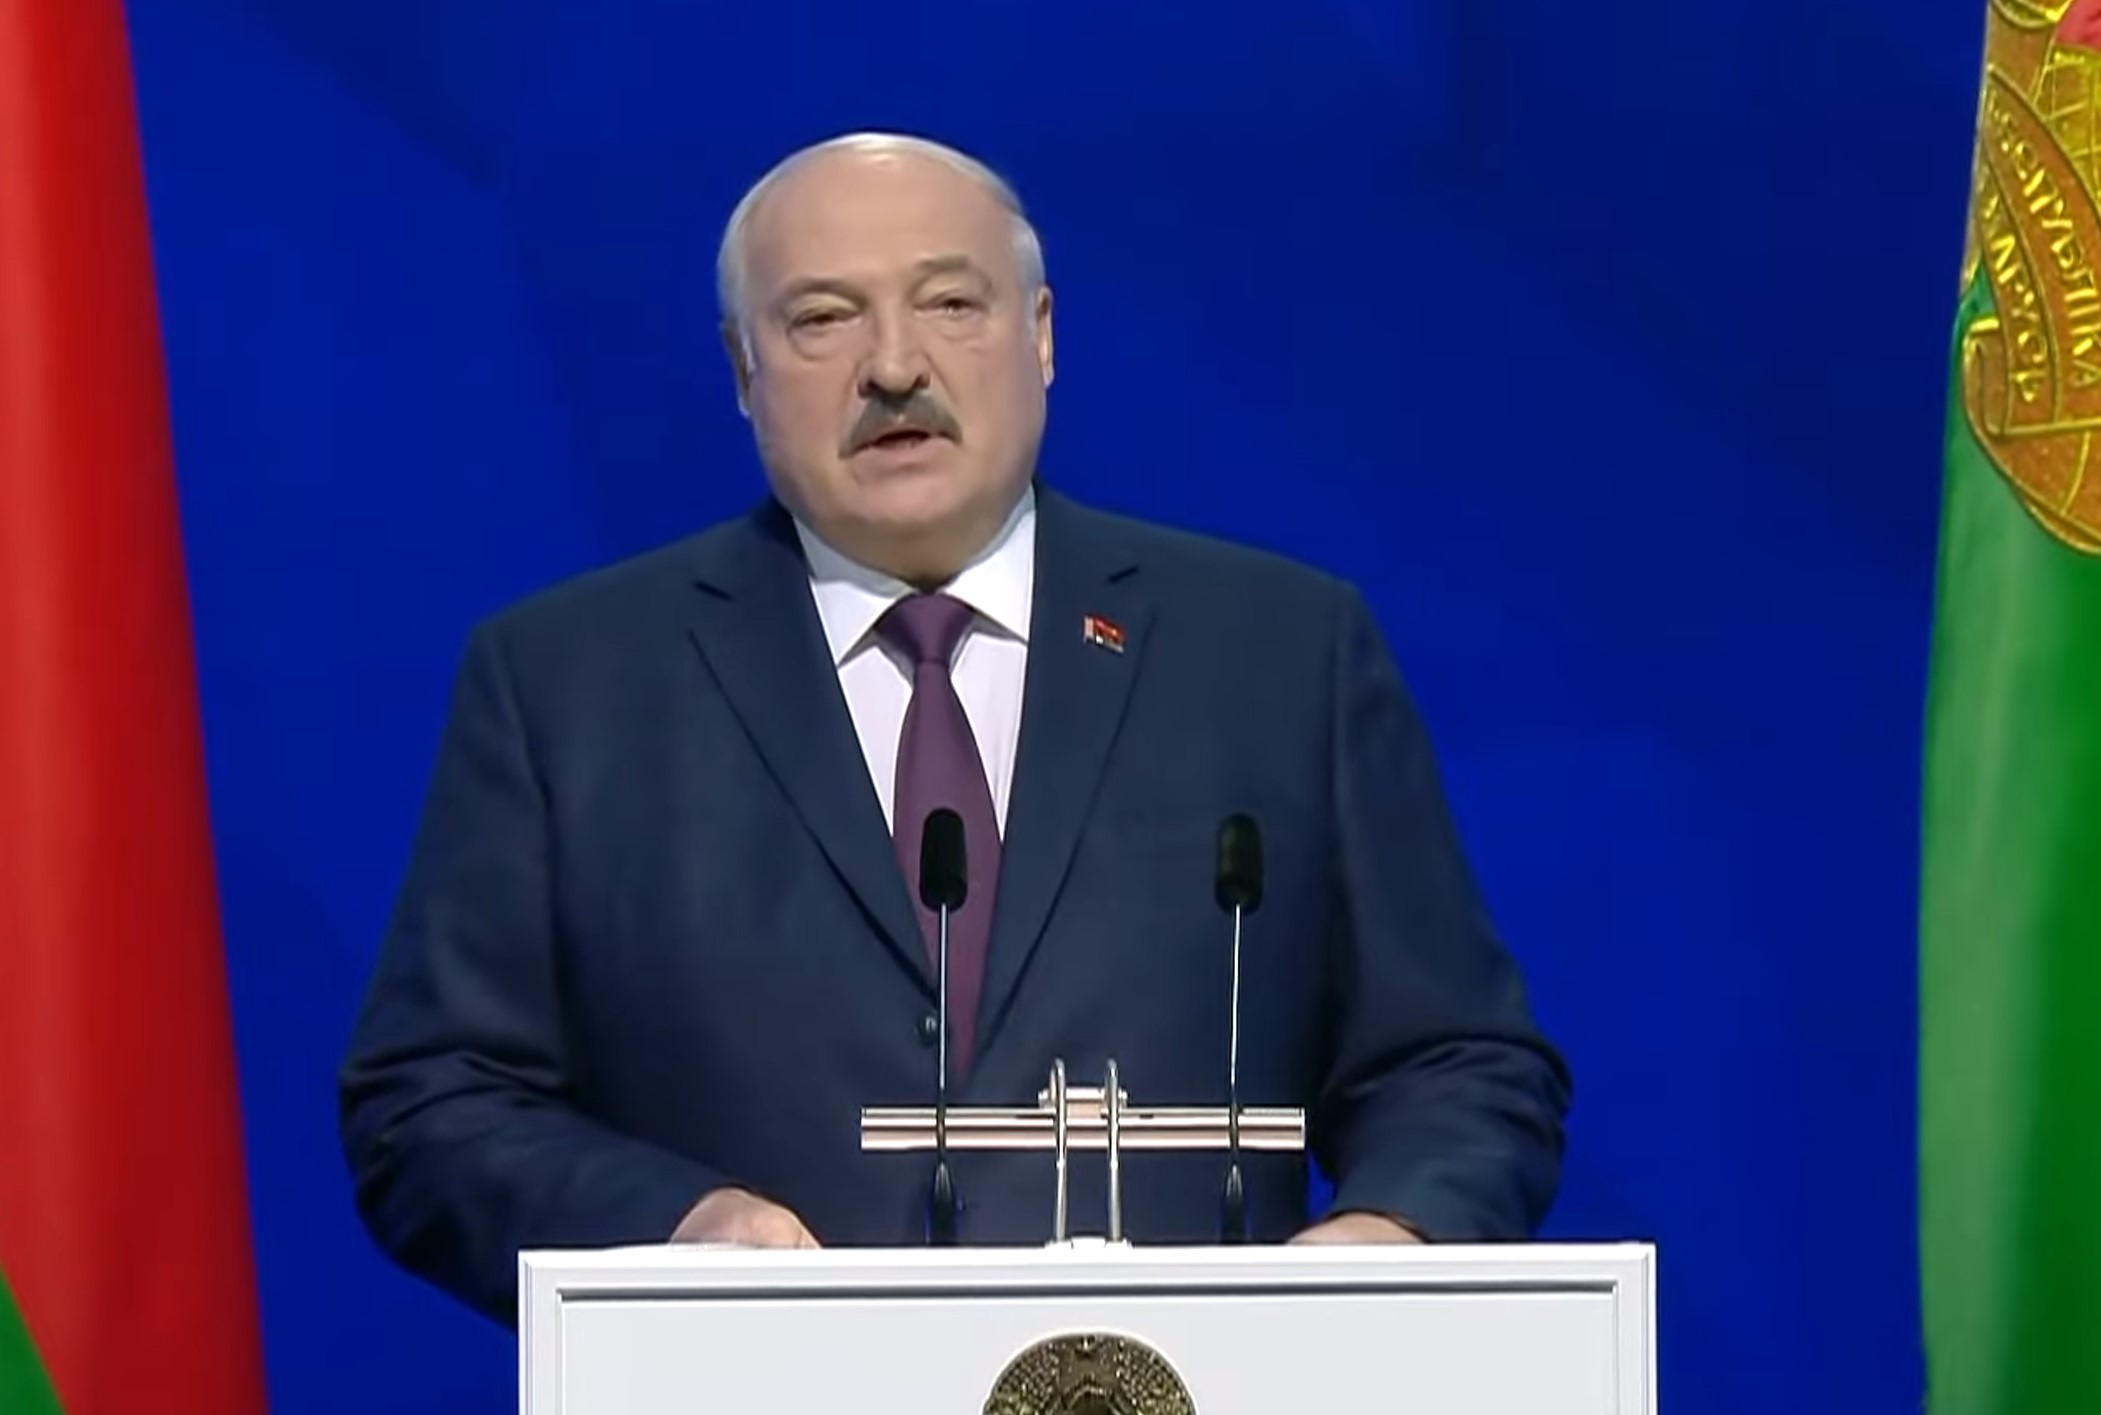 Lukashenka aims to retain personal control as the authorities scale up repression and expropriations